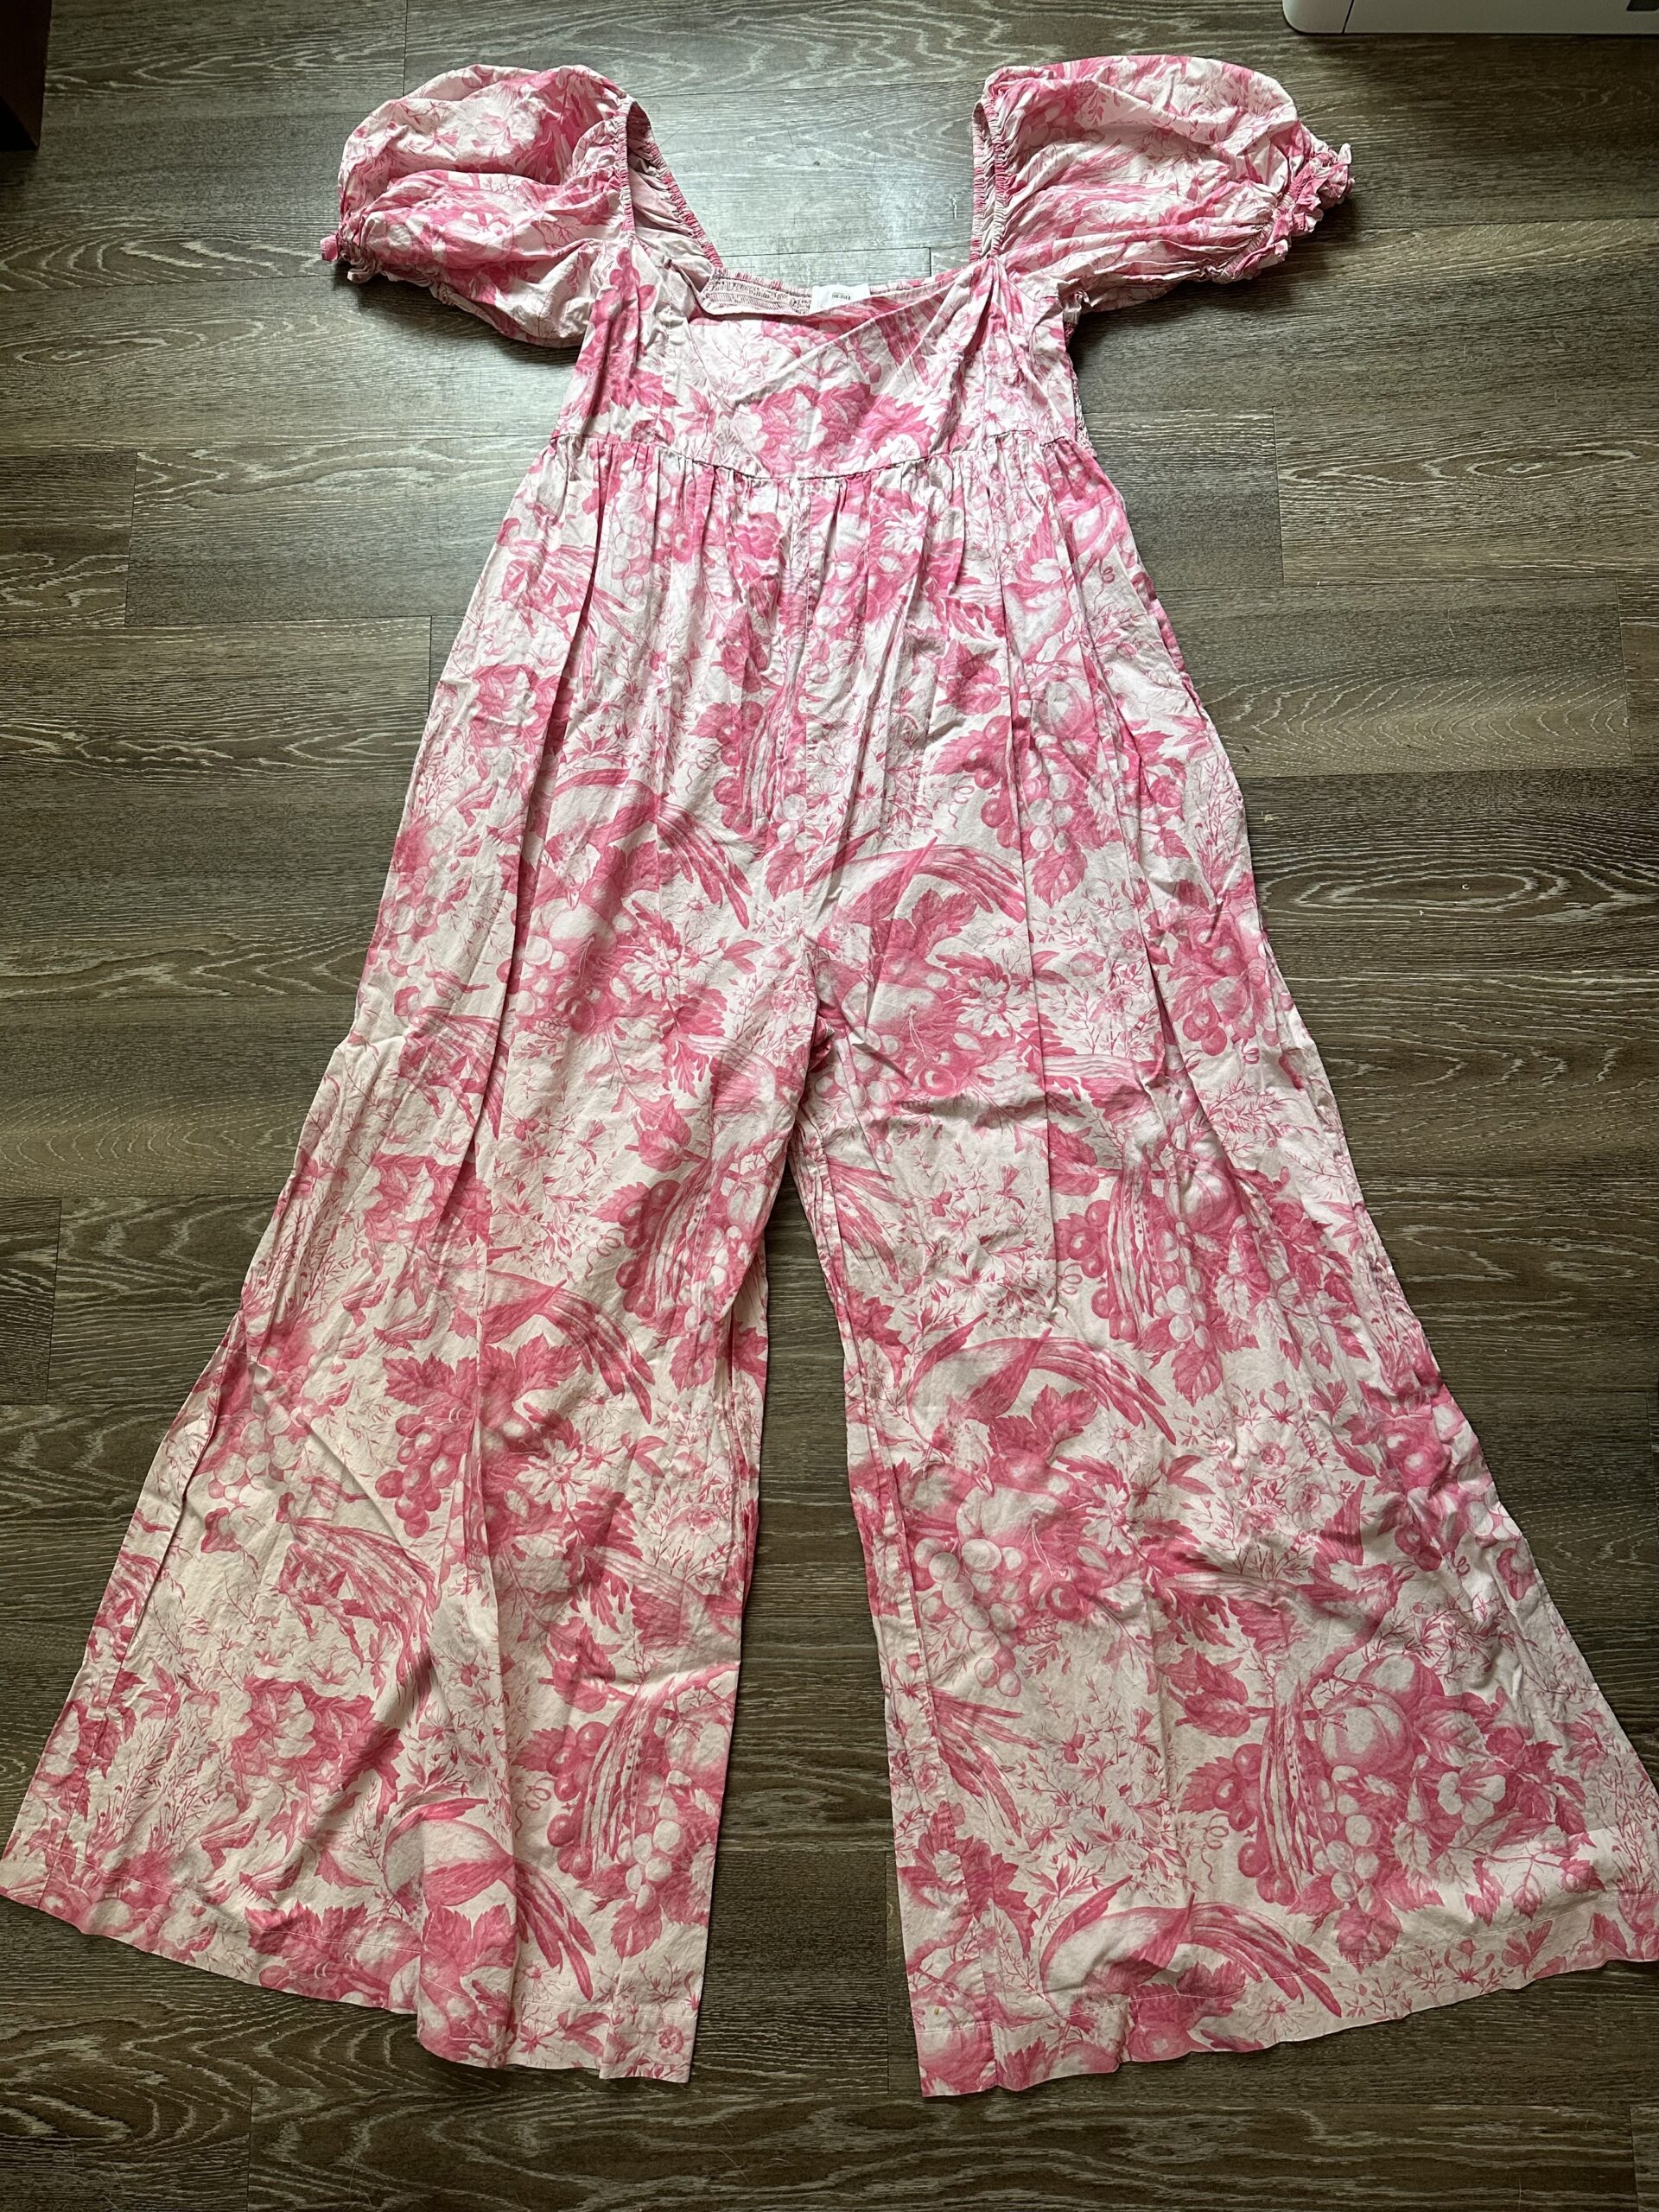 A pink floral jumpsuit with puffed sleeves spread out on a wooden floor.